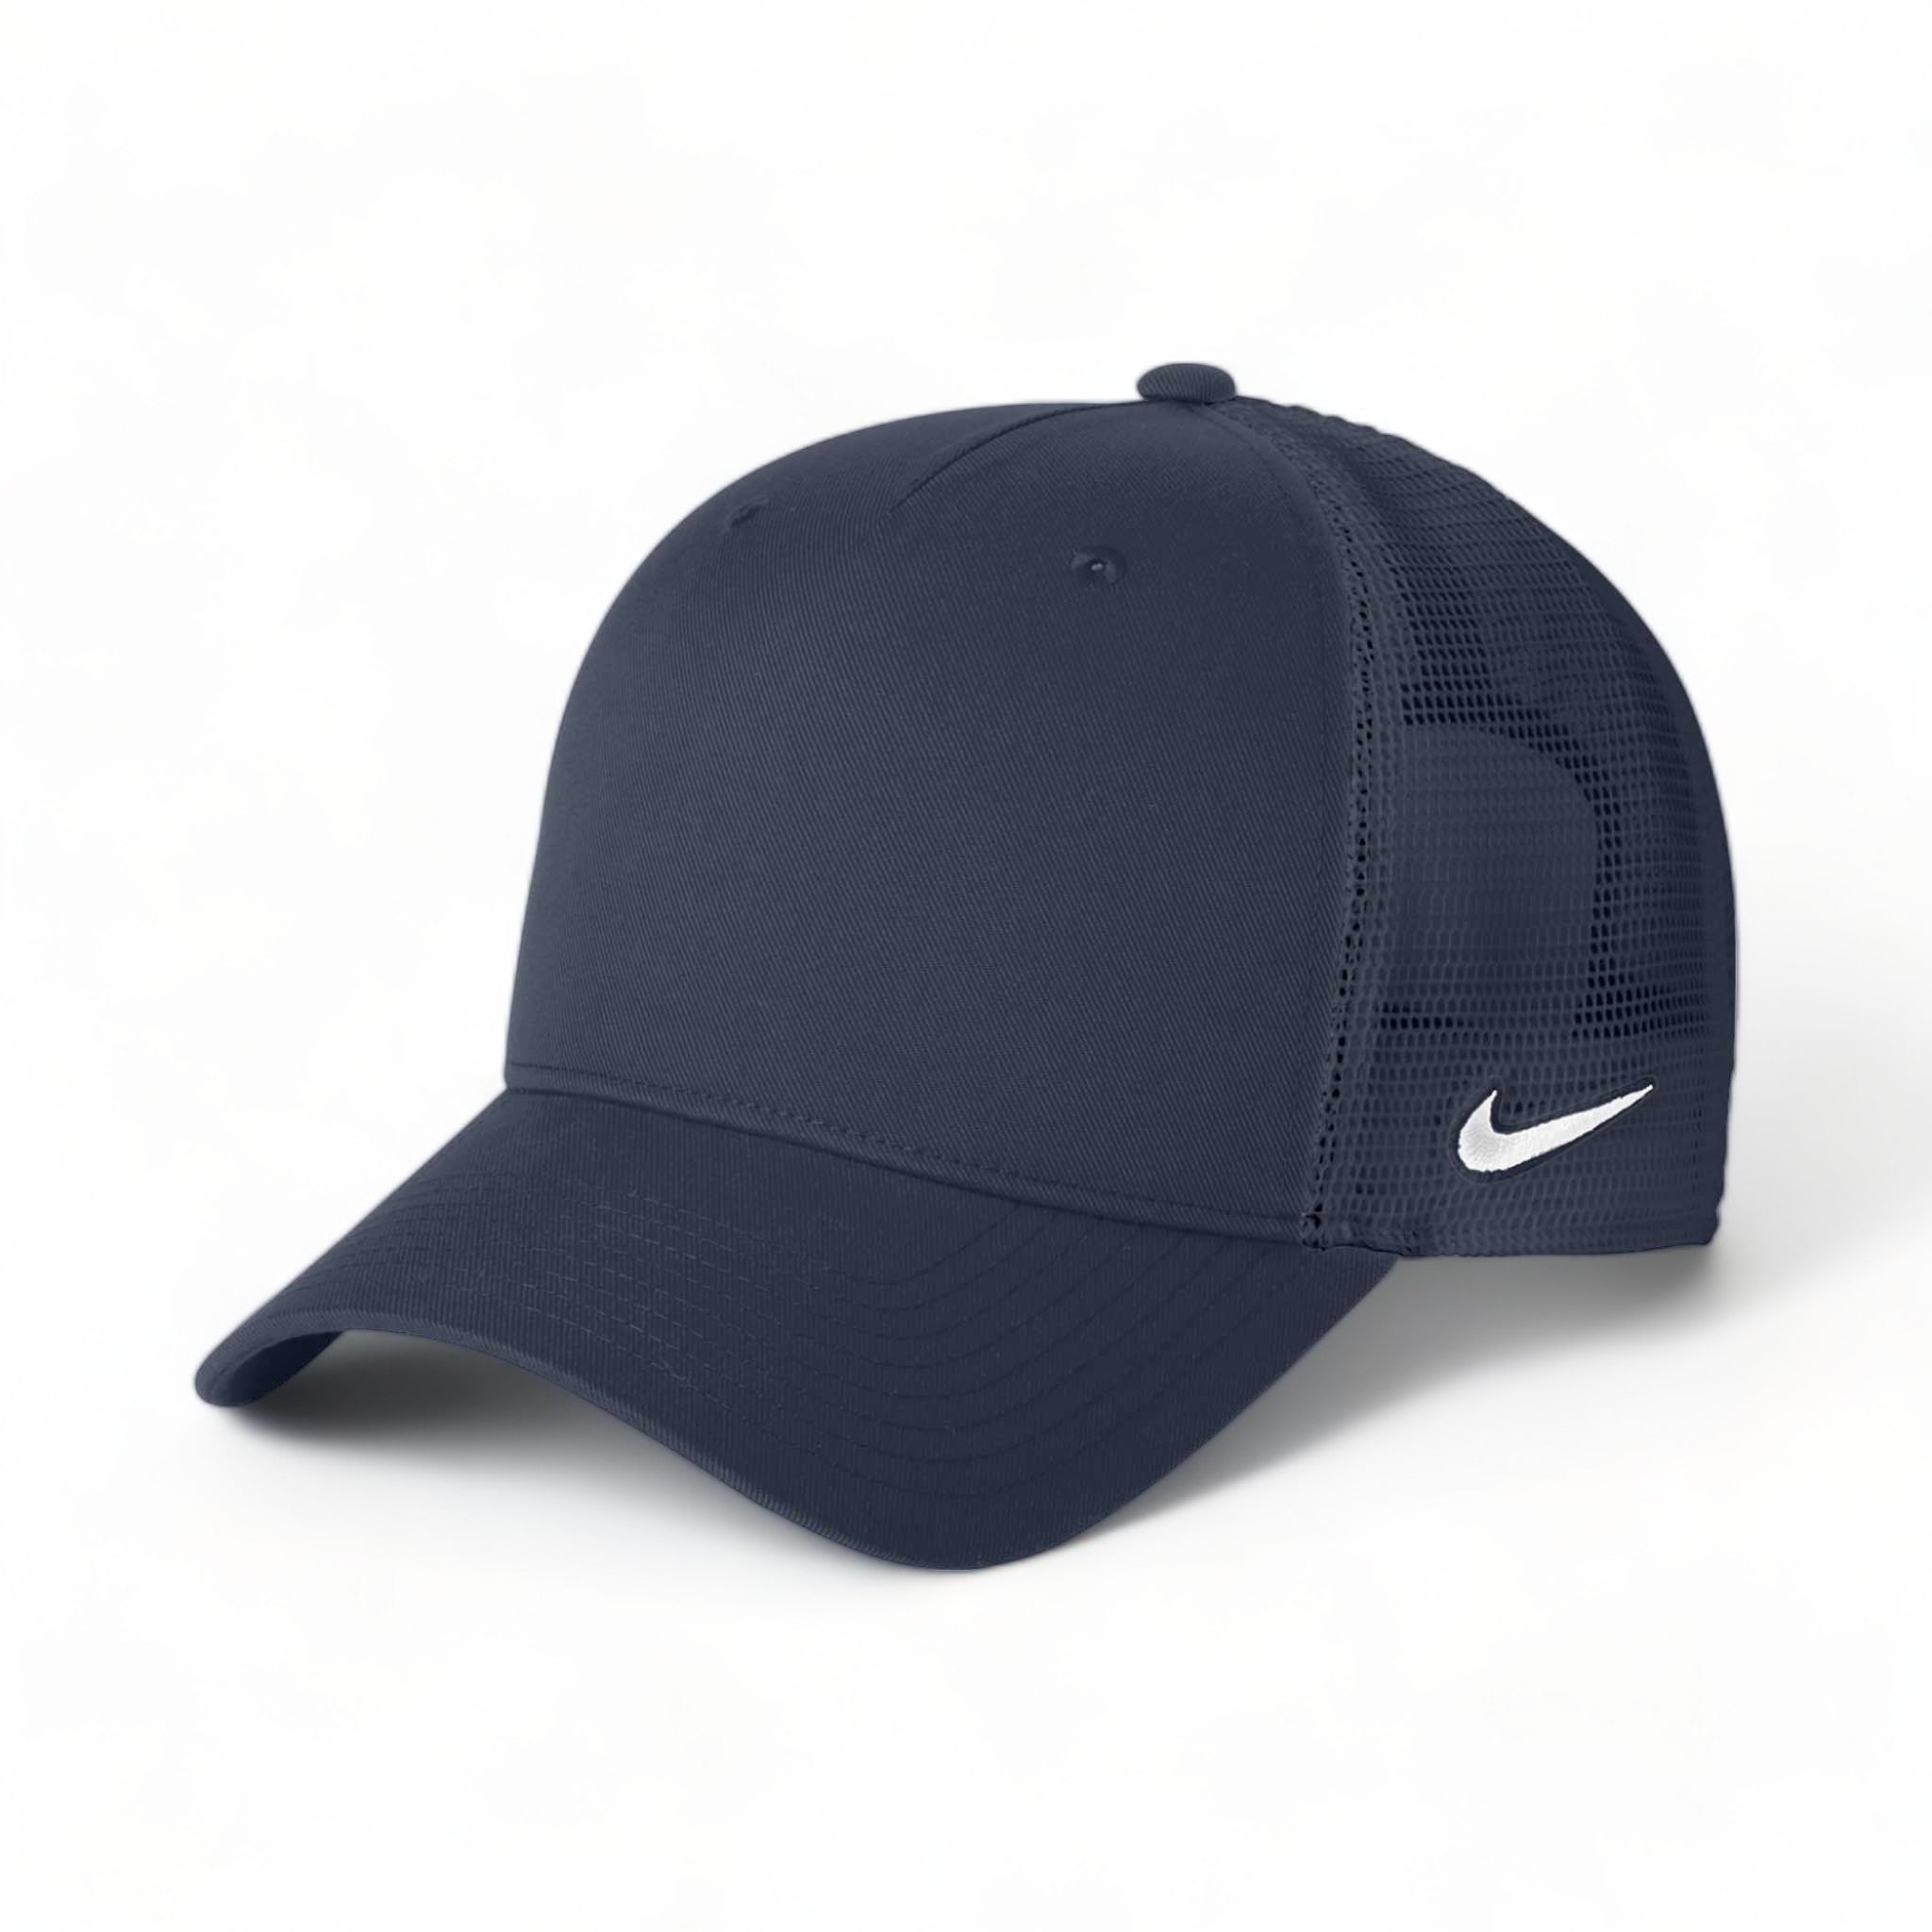 Side view of Nike NKFN9893 custom hat in navy and navy